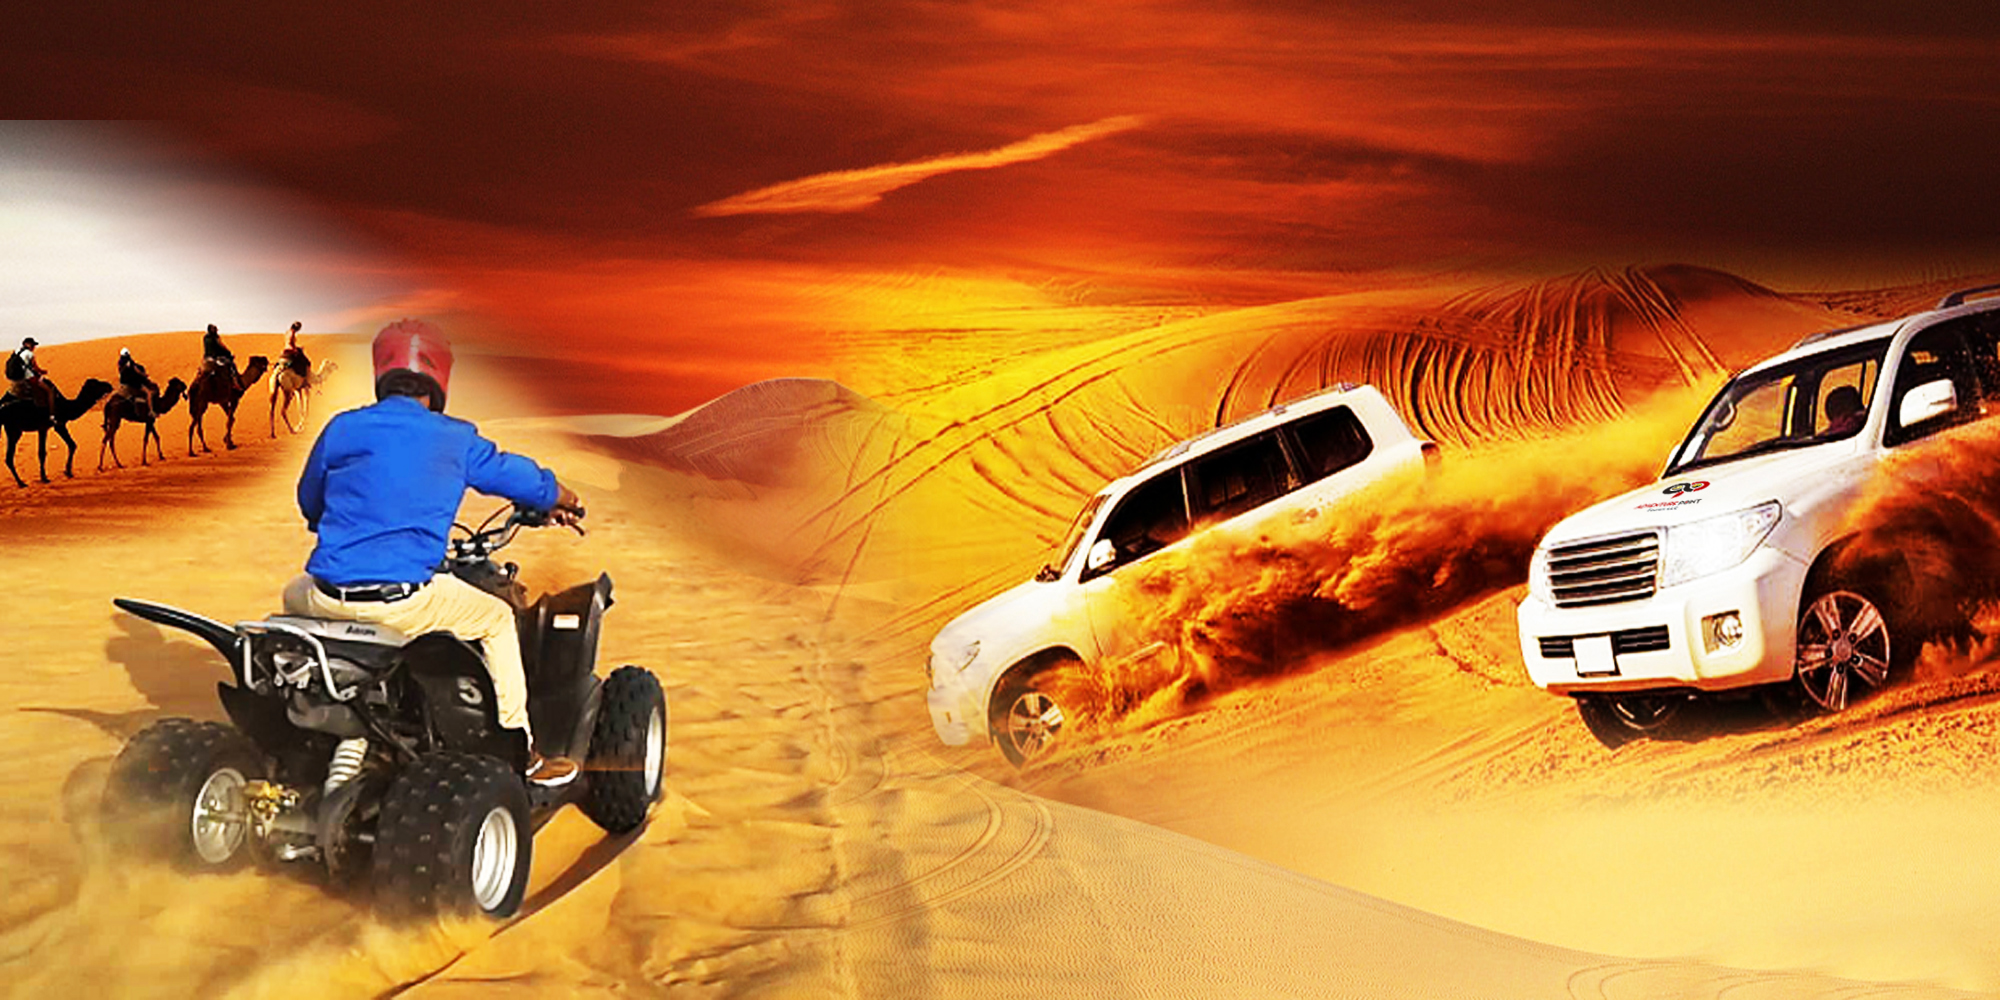 Desert Safari with BBQ Dinner and Live Shows